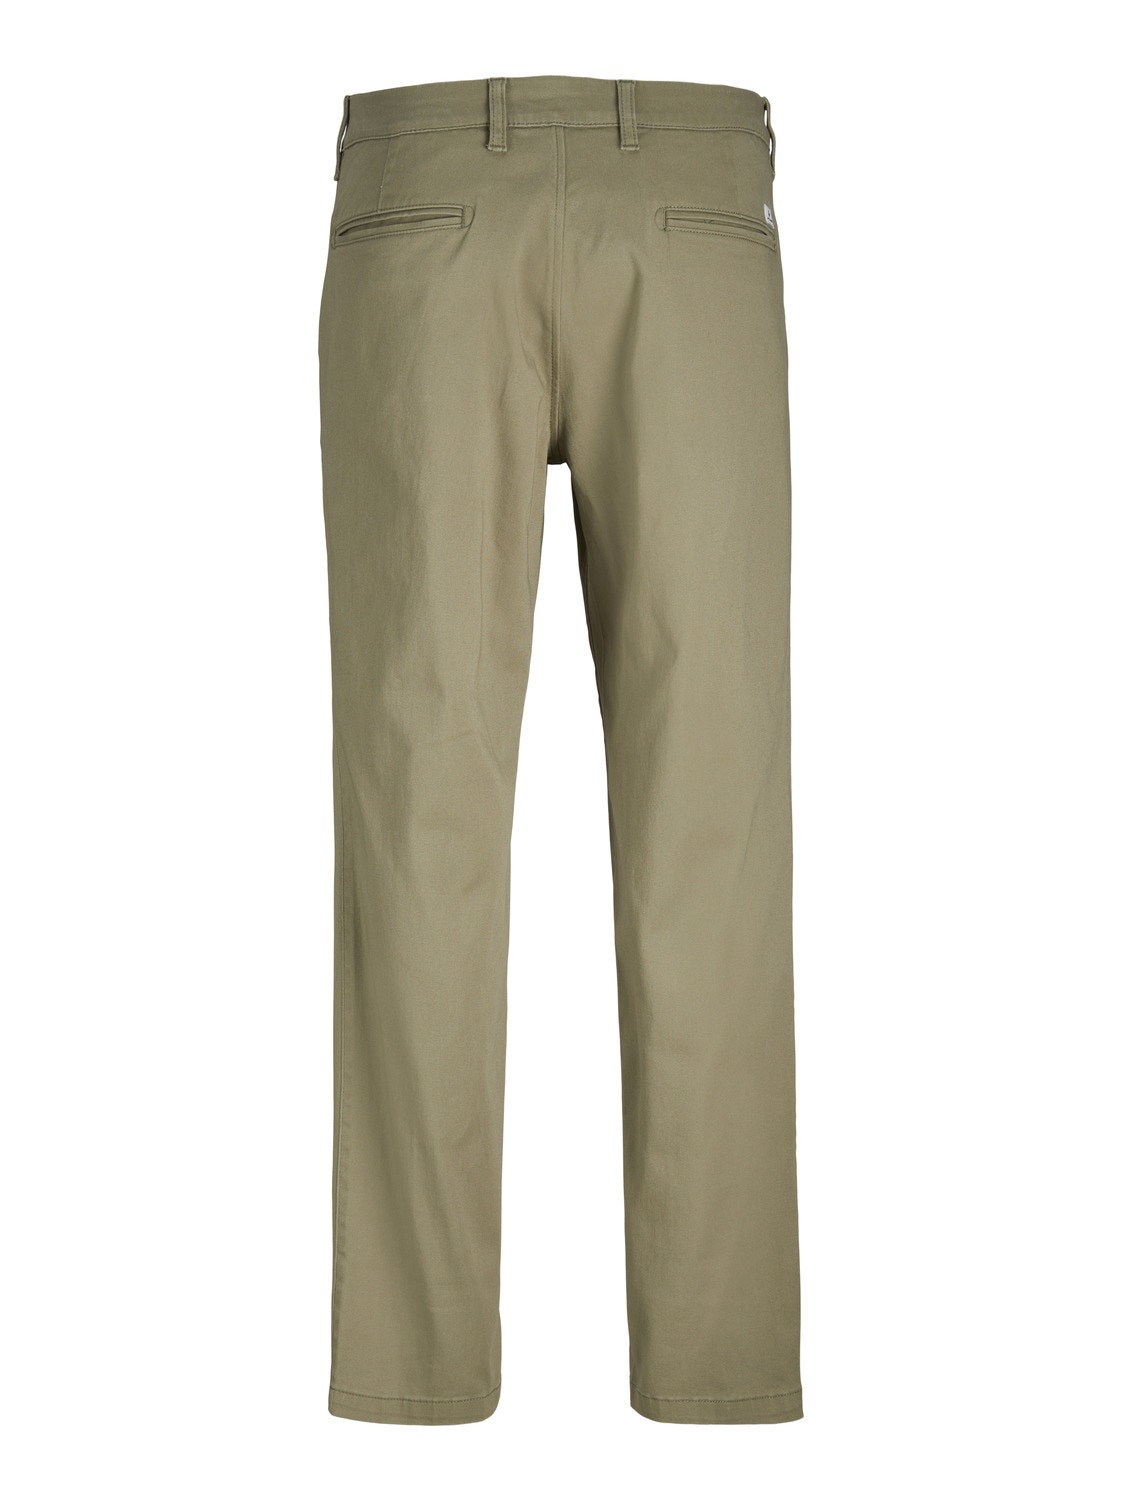 Jack & Jones Relaxed Fit Chino trousers -Oil Green - 12212936